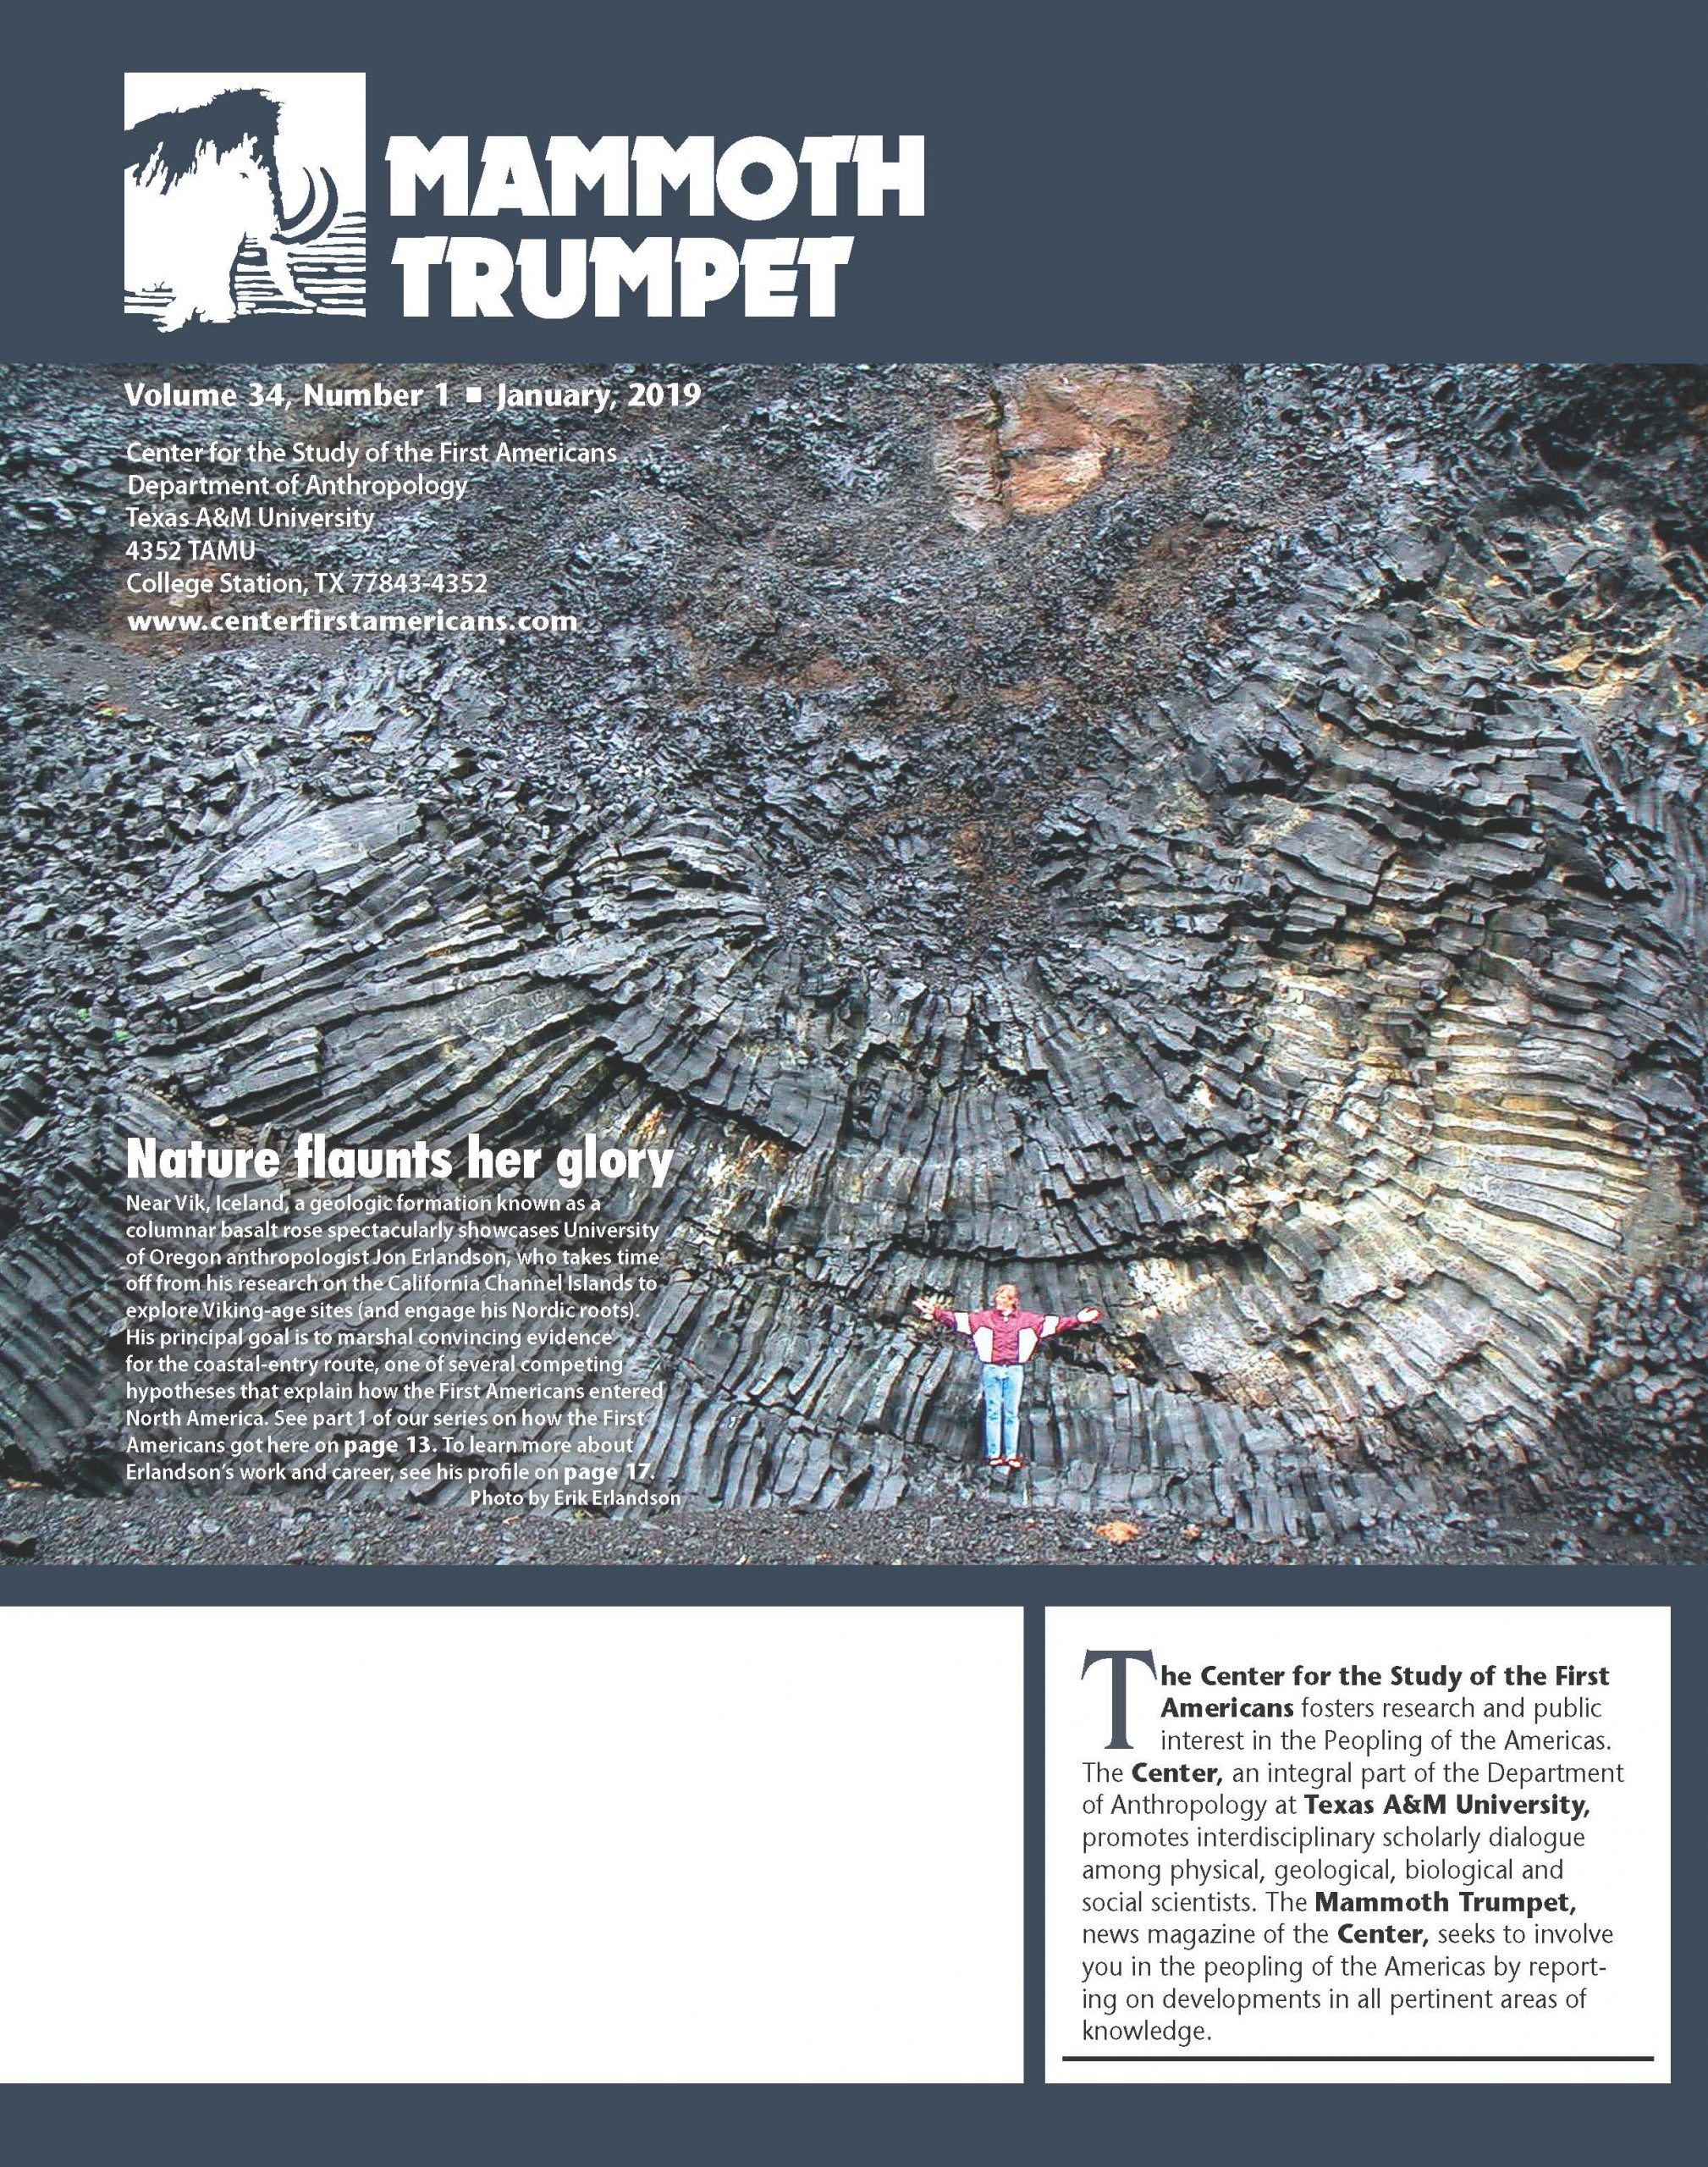 Cover of January 2019 Mammoth Trumpet